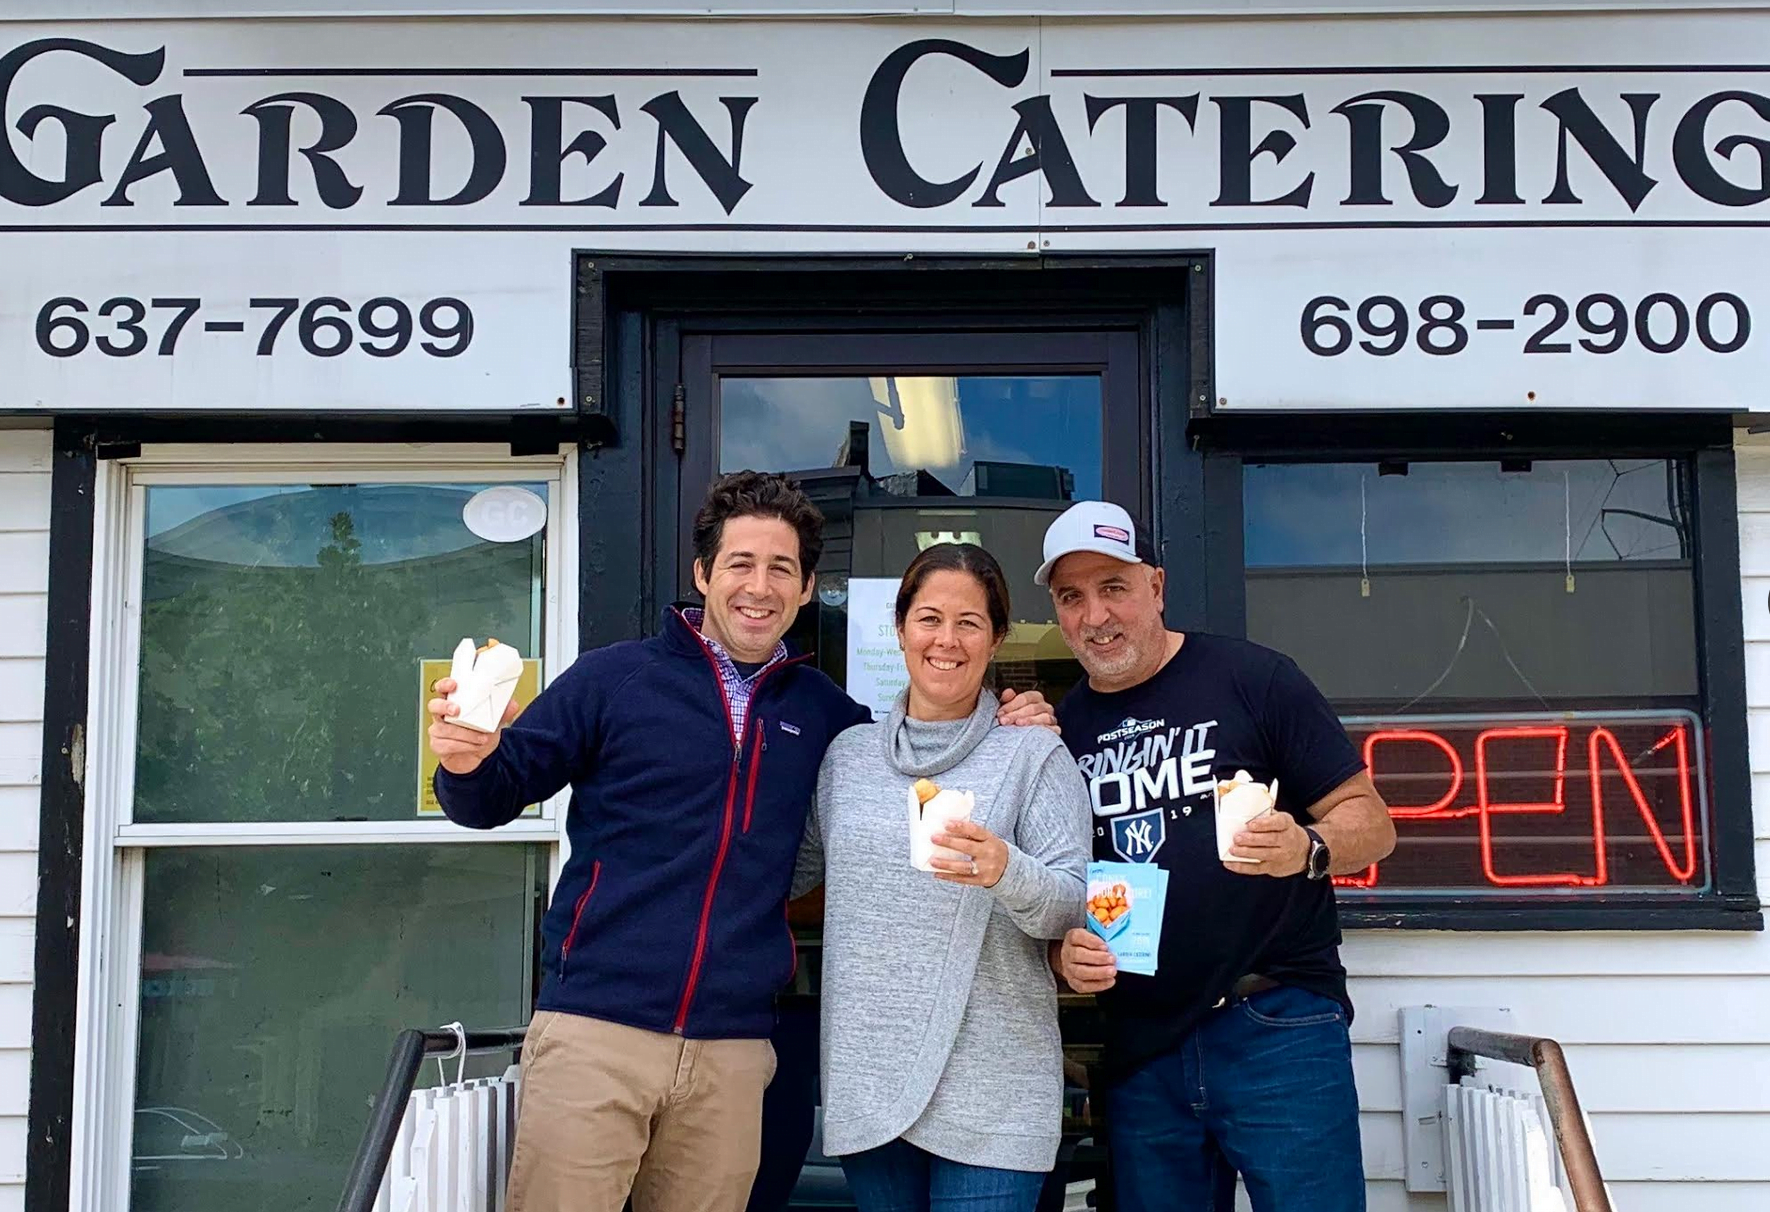 Garden Catering Announces Cones For The Cure Greenwich Free Press